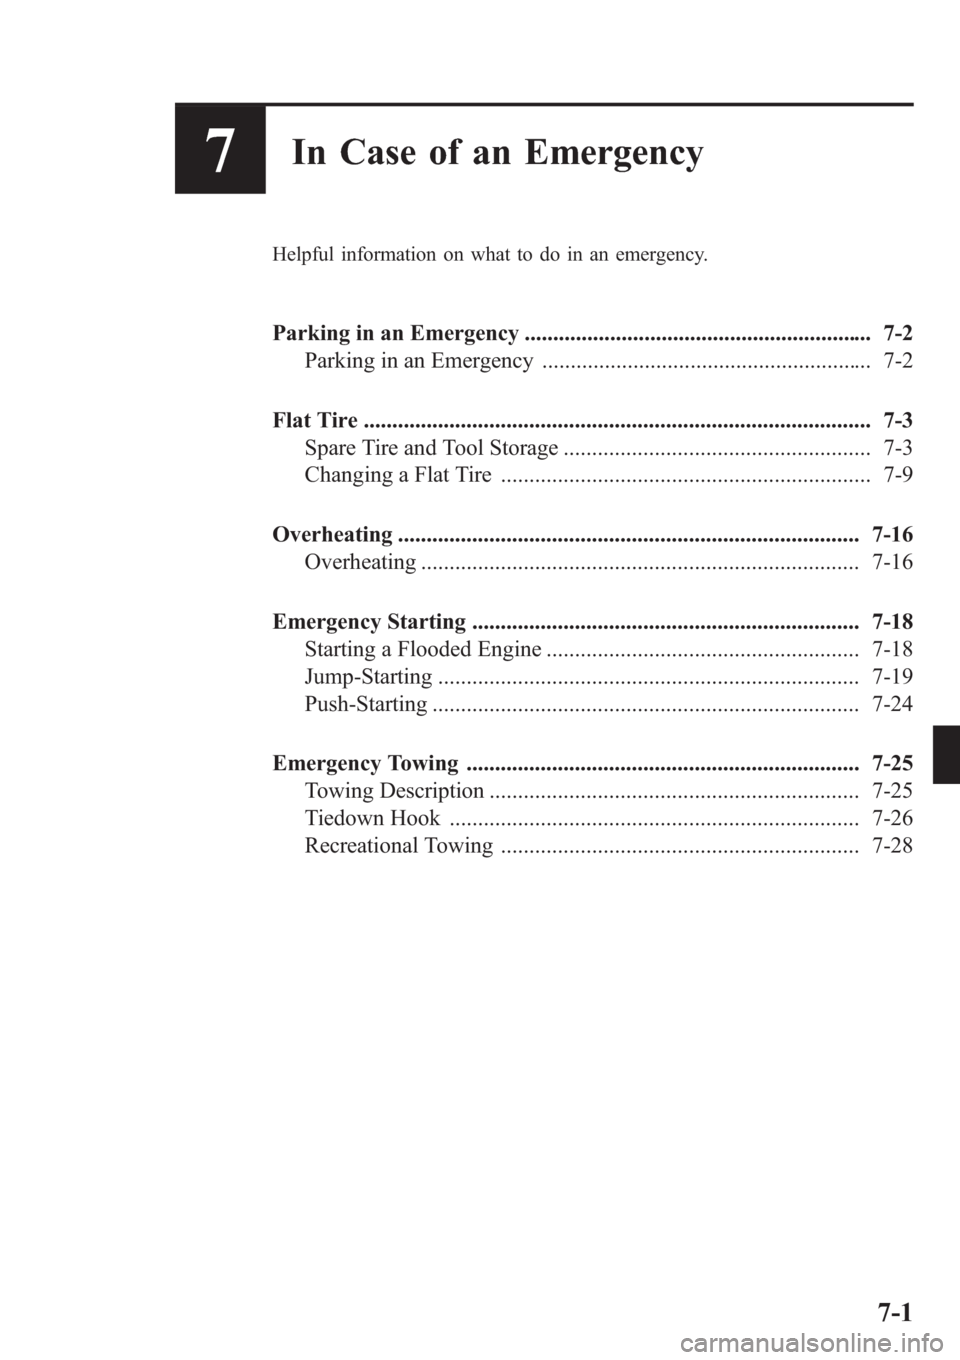 MAZDA MODEL 3 HATCHBACK 2013  Owners Manual (in English) 7In Case of an Emergency
Helpful information on what to do in an emergency.
Parking in an Emergency ............................................................. 7-2
Parking in an Emergency ..........